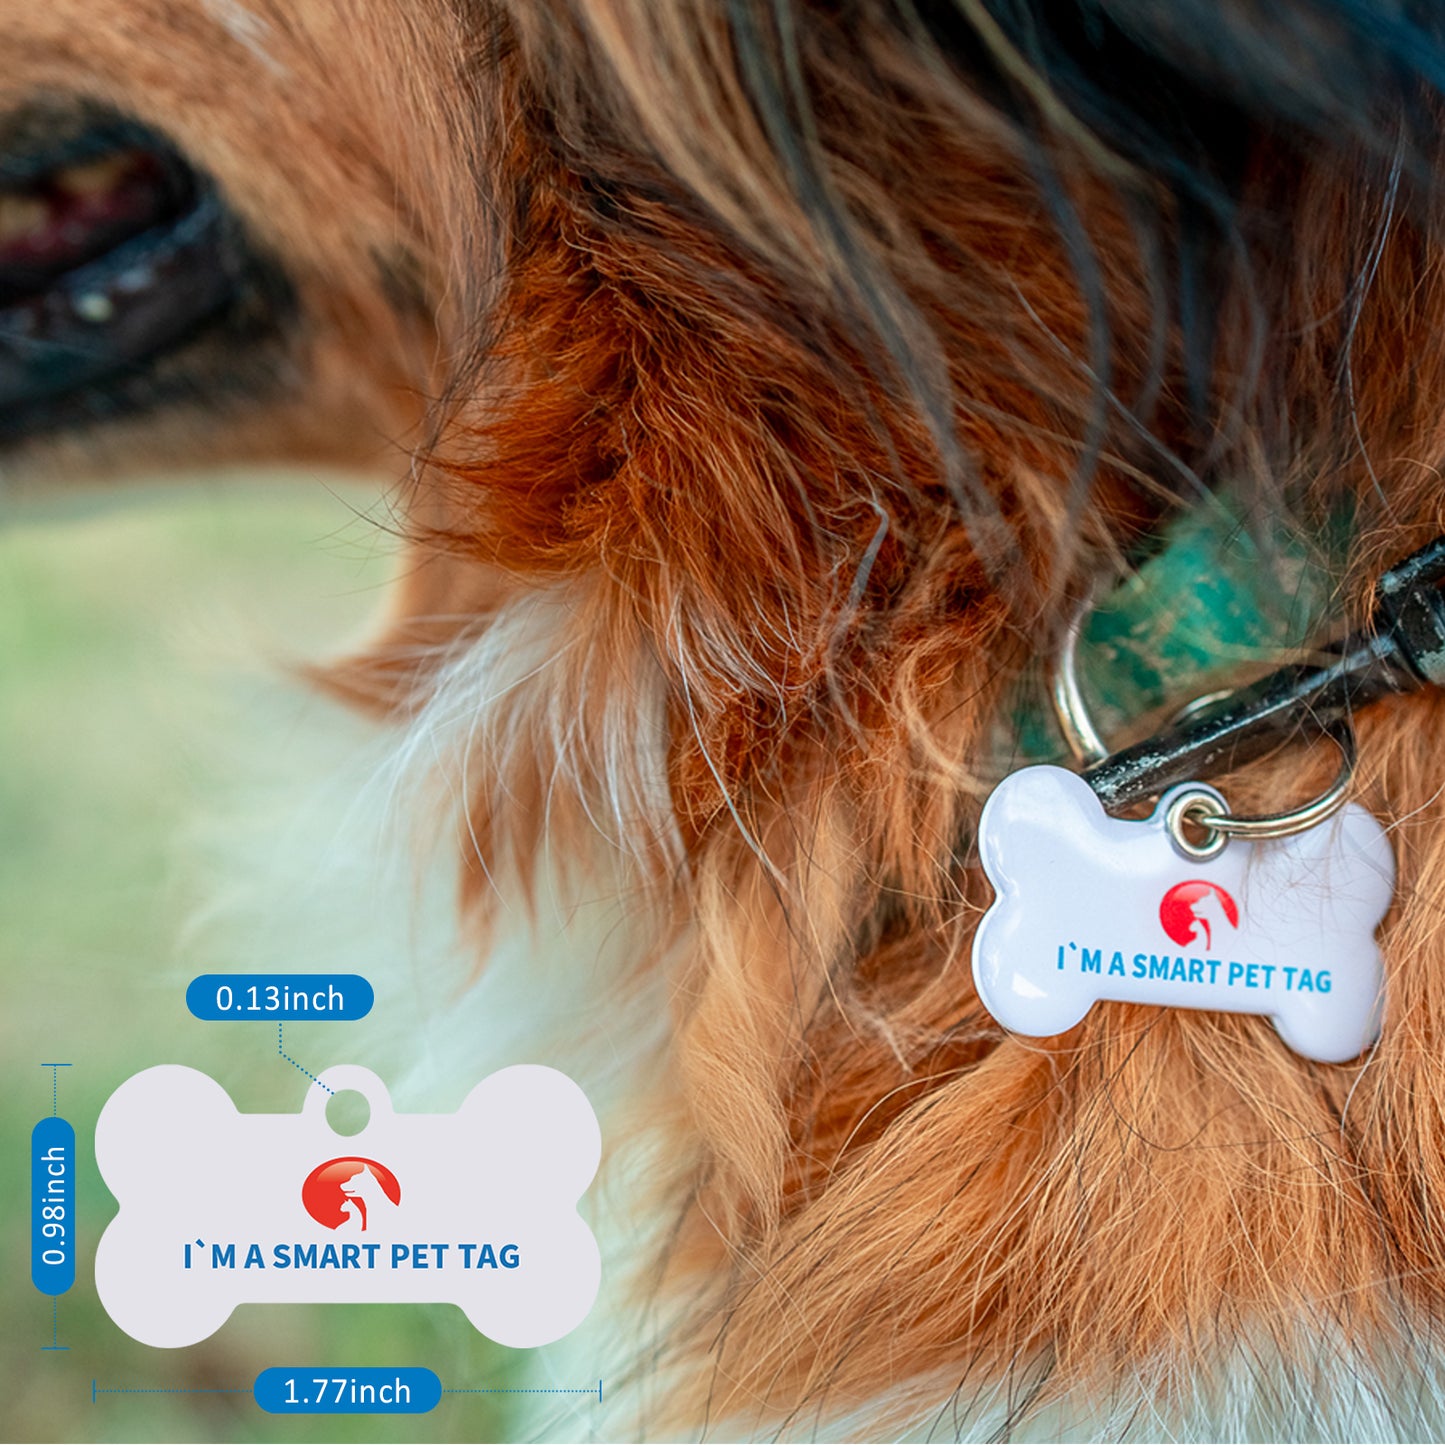 RexID Dog Tag QR Code Pet ID Tags with Pet Online Profile and Owner Contact,Smart Permanent ID Tag for Connecting Pet Owner Immediately by Anybody Anywhere with Mobile Phone